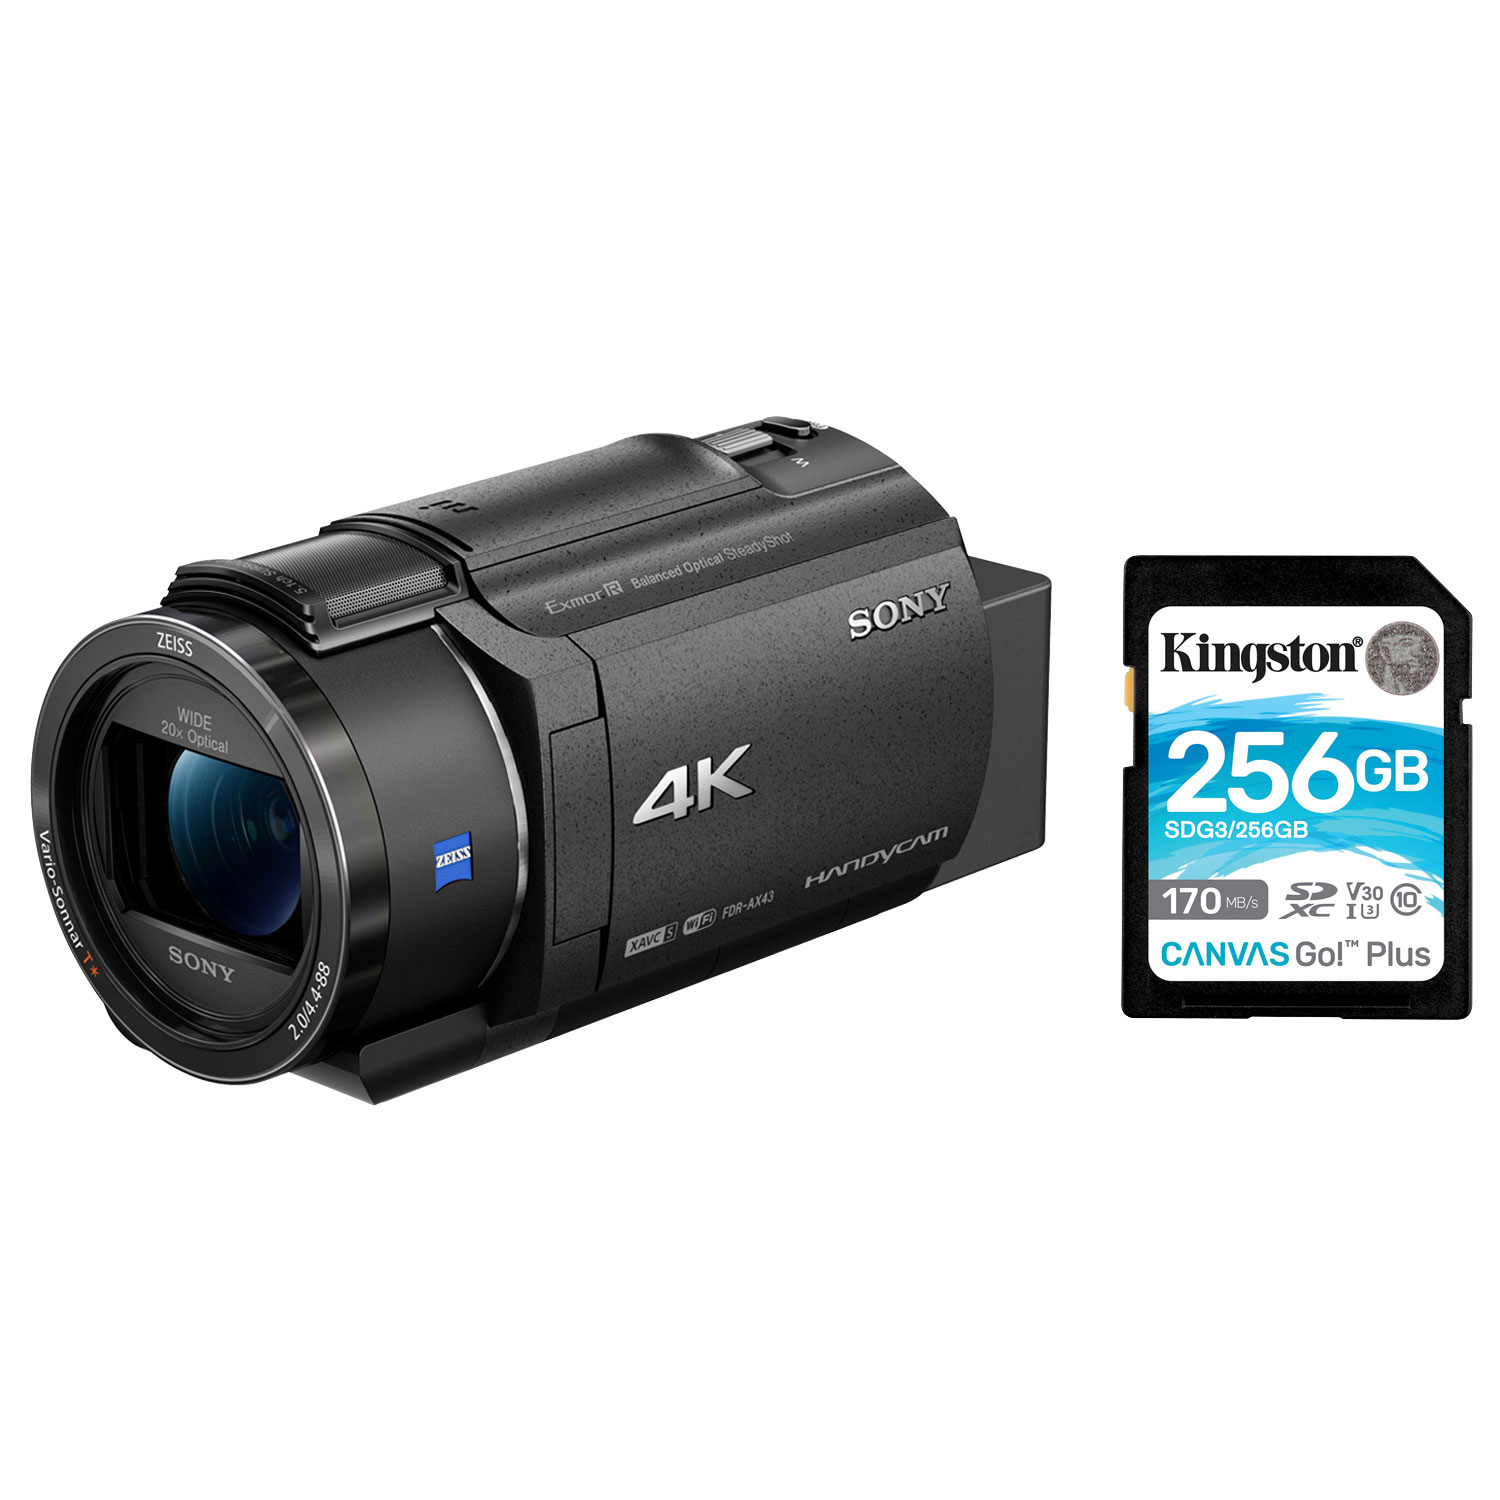 Sony FDR-AX43A 4K Handycam Content Creator Flash Memory Camcorder with 256GB Memory Card